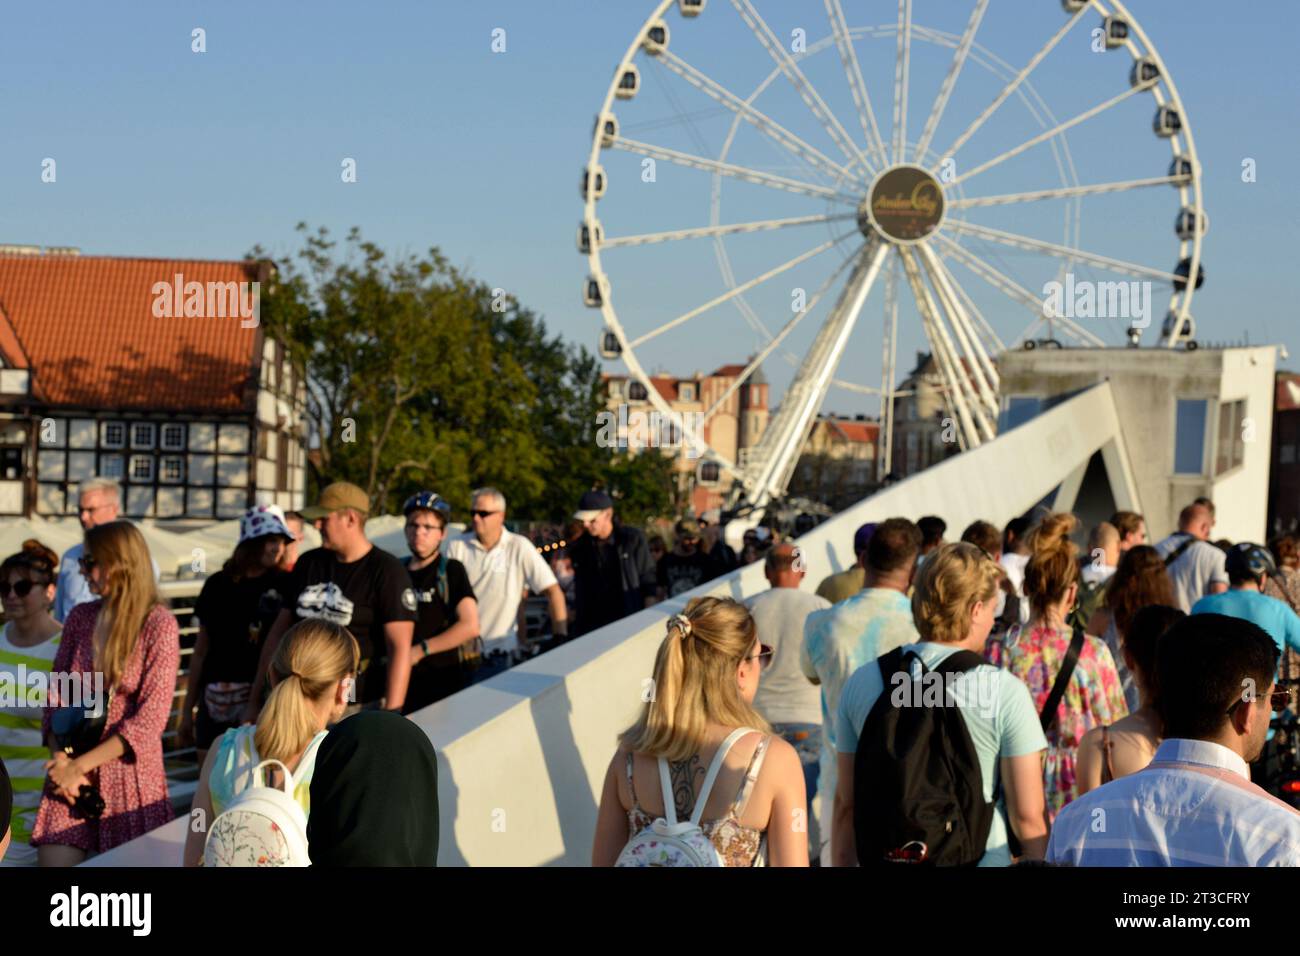 People on Wartka Bridge at the Amber Sky or AmberSky Ferris Wheel in the Old Town of Gdansk, Poland, Europe, EU Stock Photo